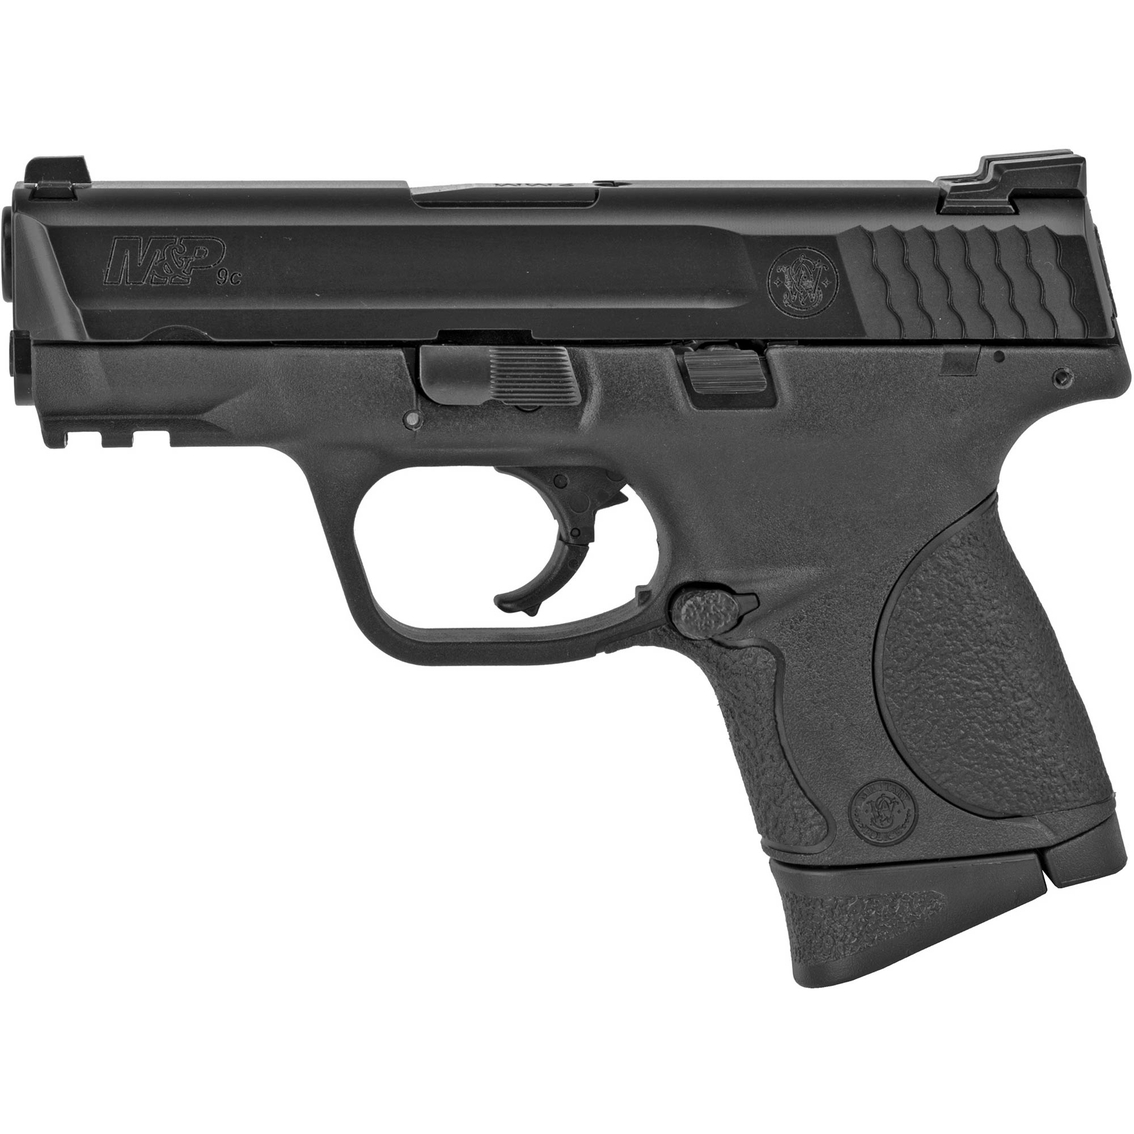 S&W M&P Compact 9mm 3.5 in. Barrel 12 Rnd 2 Mag Pistol Black - Image 2 of 3